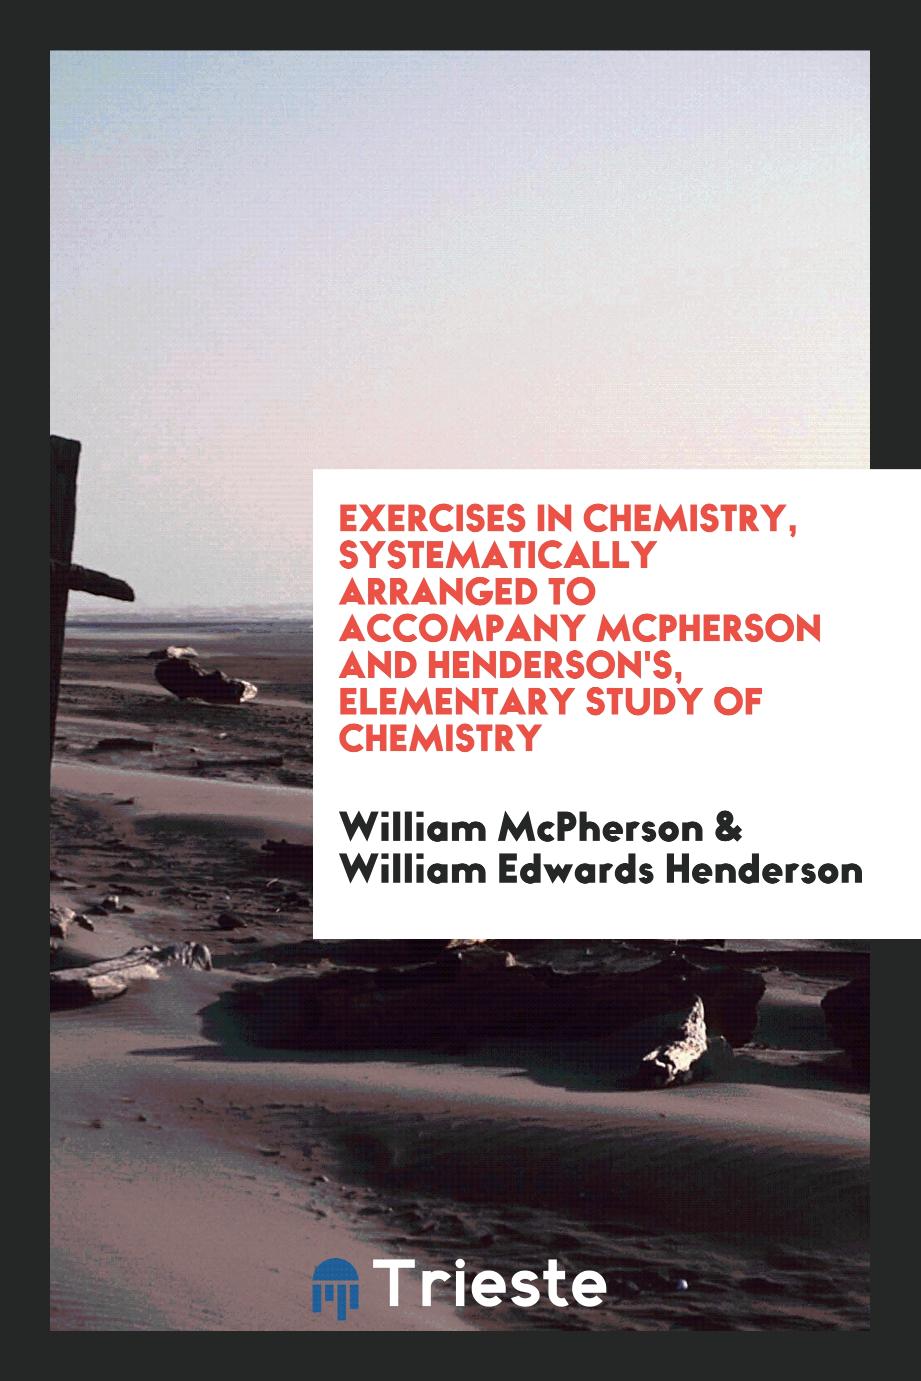 Exercises in chemistry, systematically arranged to accompany McPherson and Henderson's, elementary study of chemistry